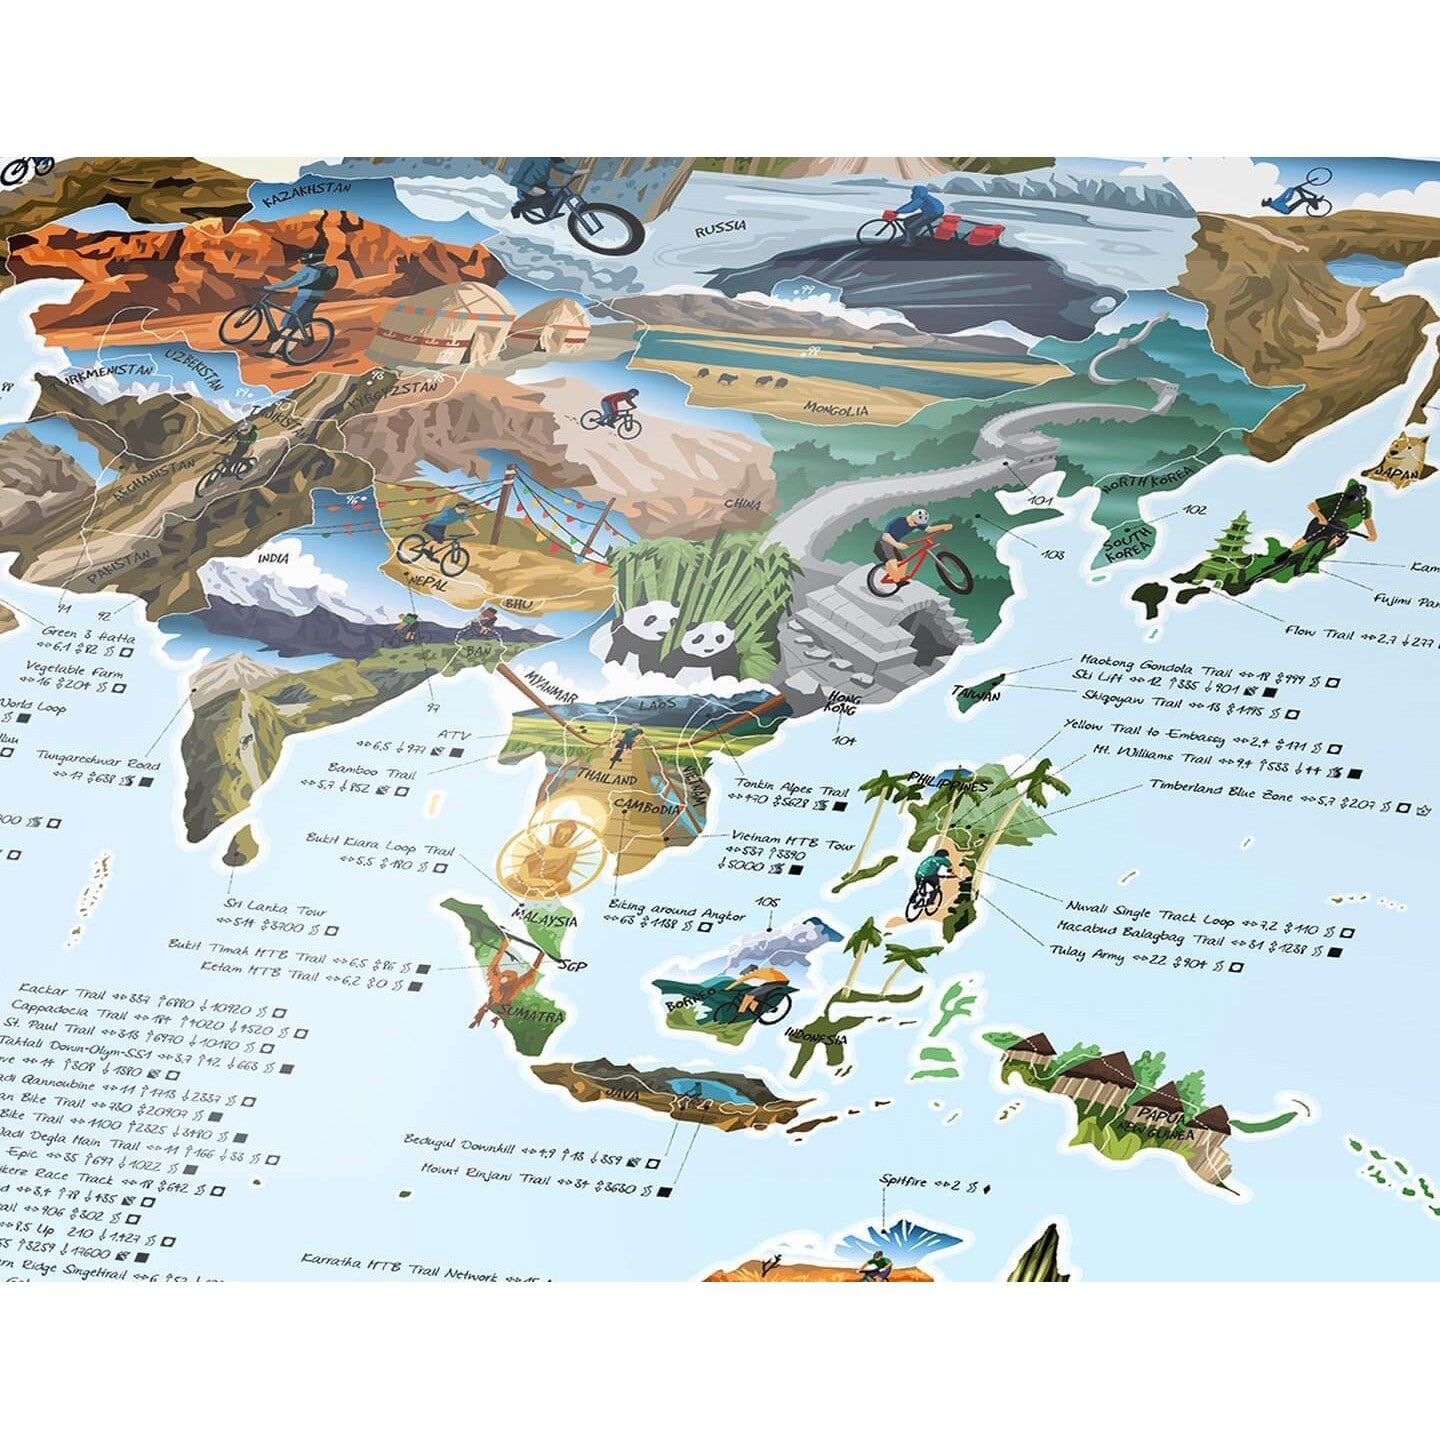 Awesome Maps - World Map Poster - Mountain Bike Map